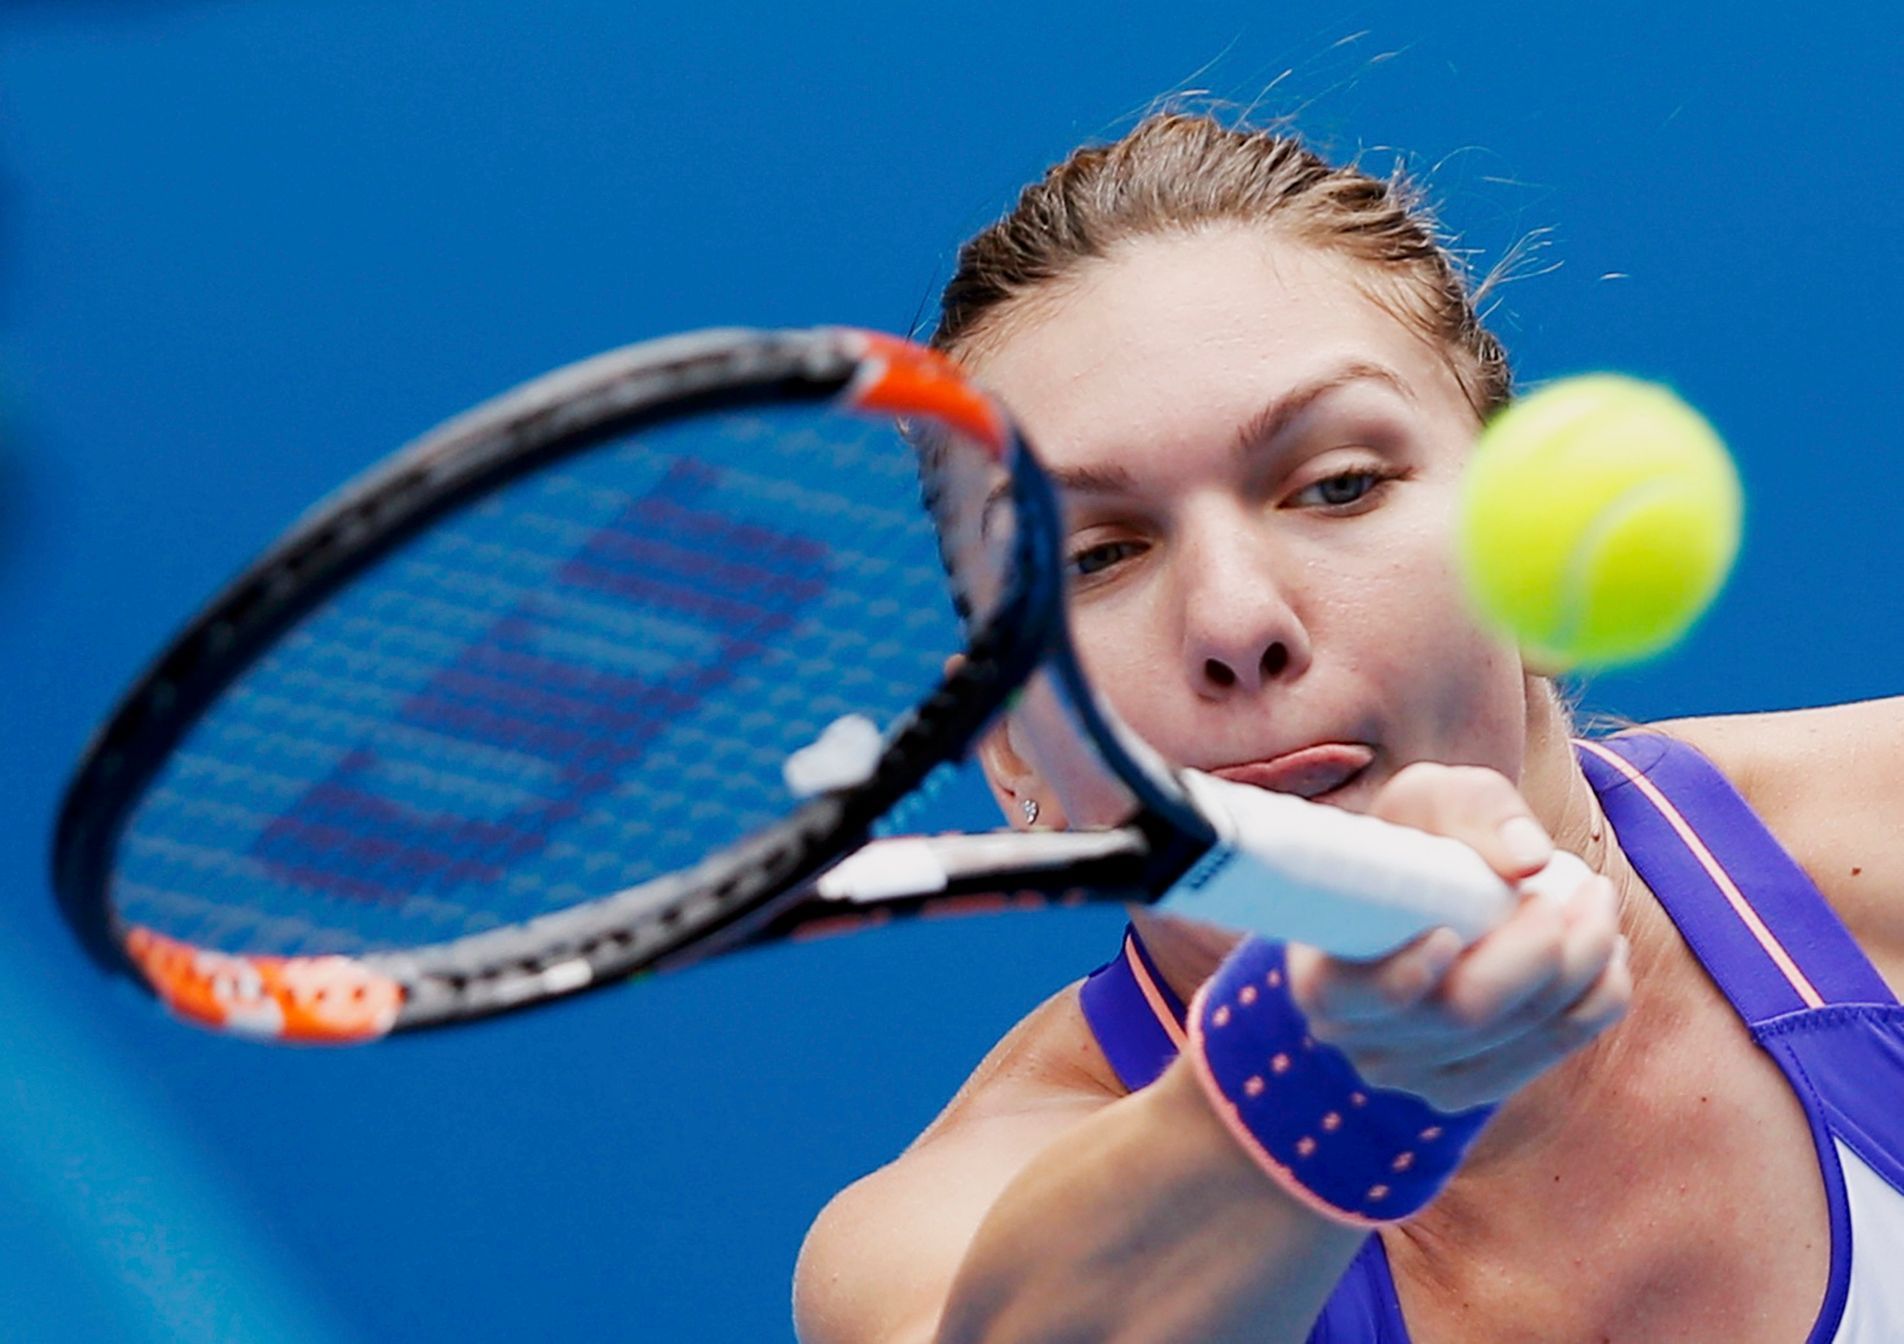 Halep of Romania hits a return to Makarova of Russia during their women's singles quarter-final match at the Australian Open 2015 tennis tournament in Melbourne